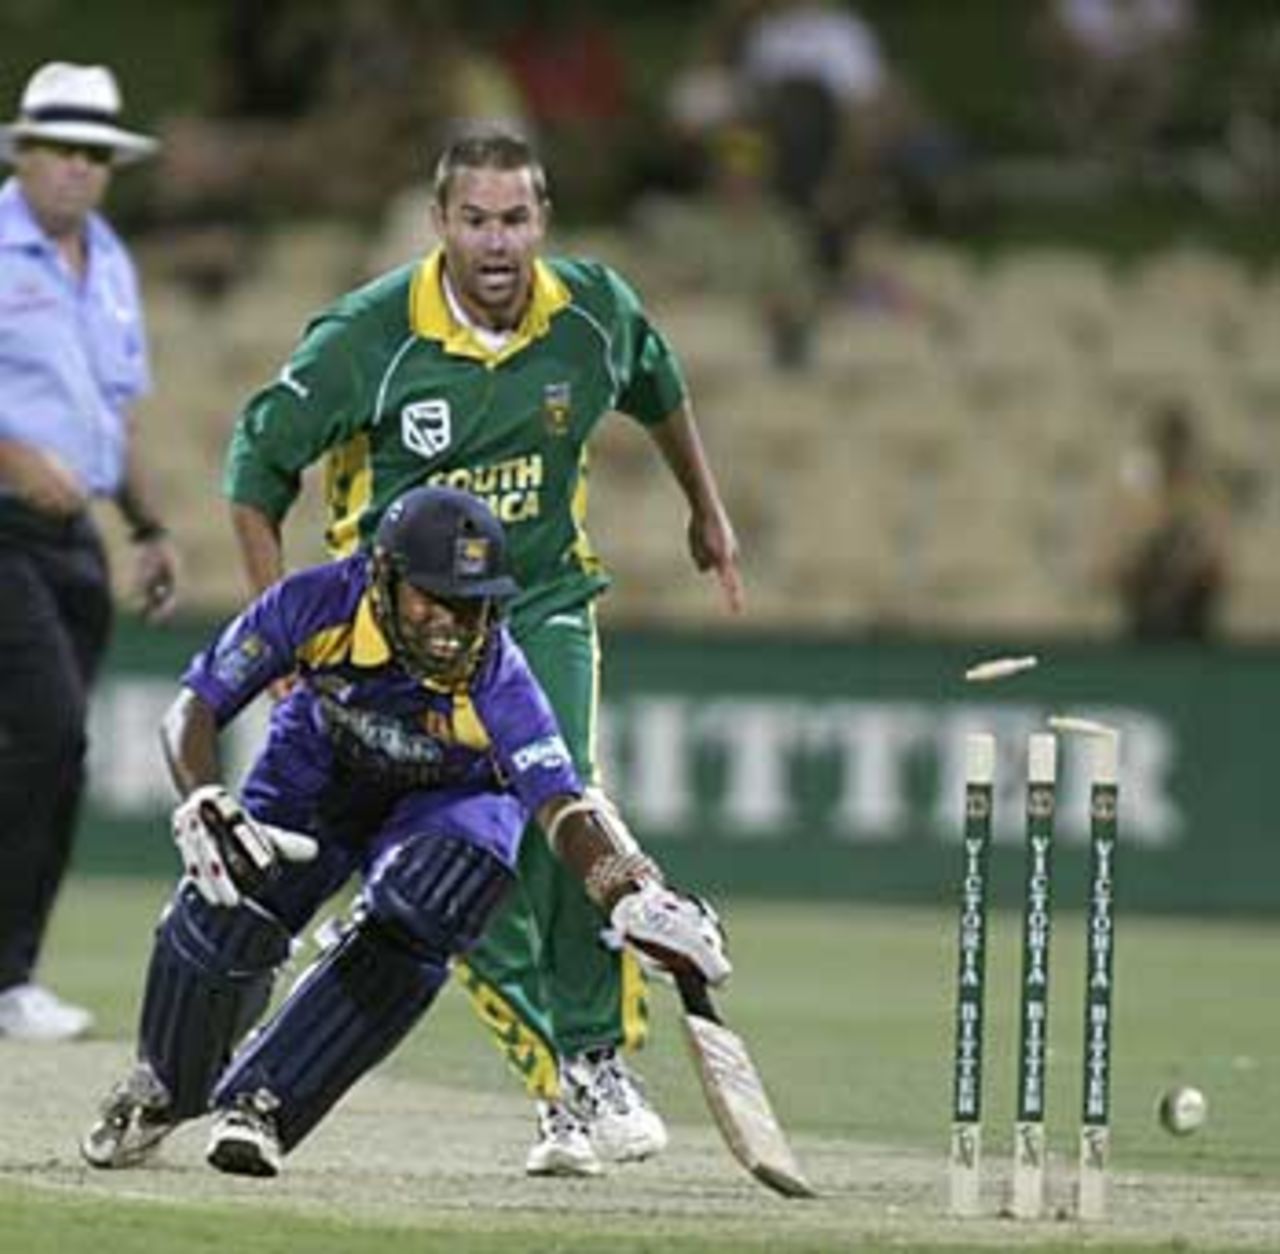 Malinga Bandara is run out for a duck by Andrew Hall, South Africa v Sri Lanka, 6th match, VB Series, Adelaide, January 24, 2006